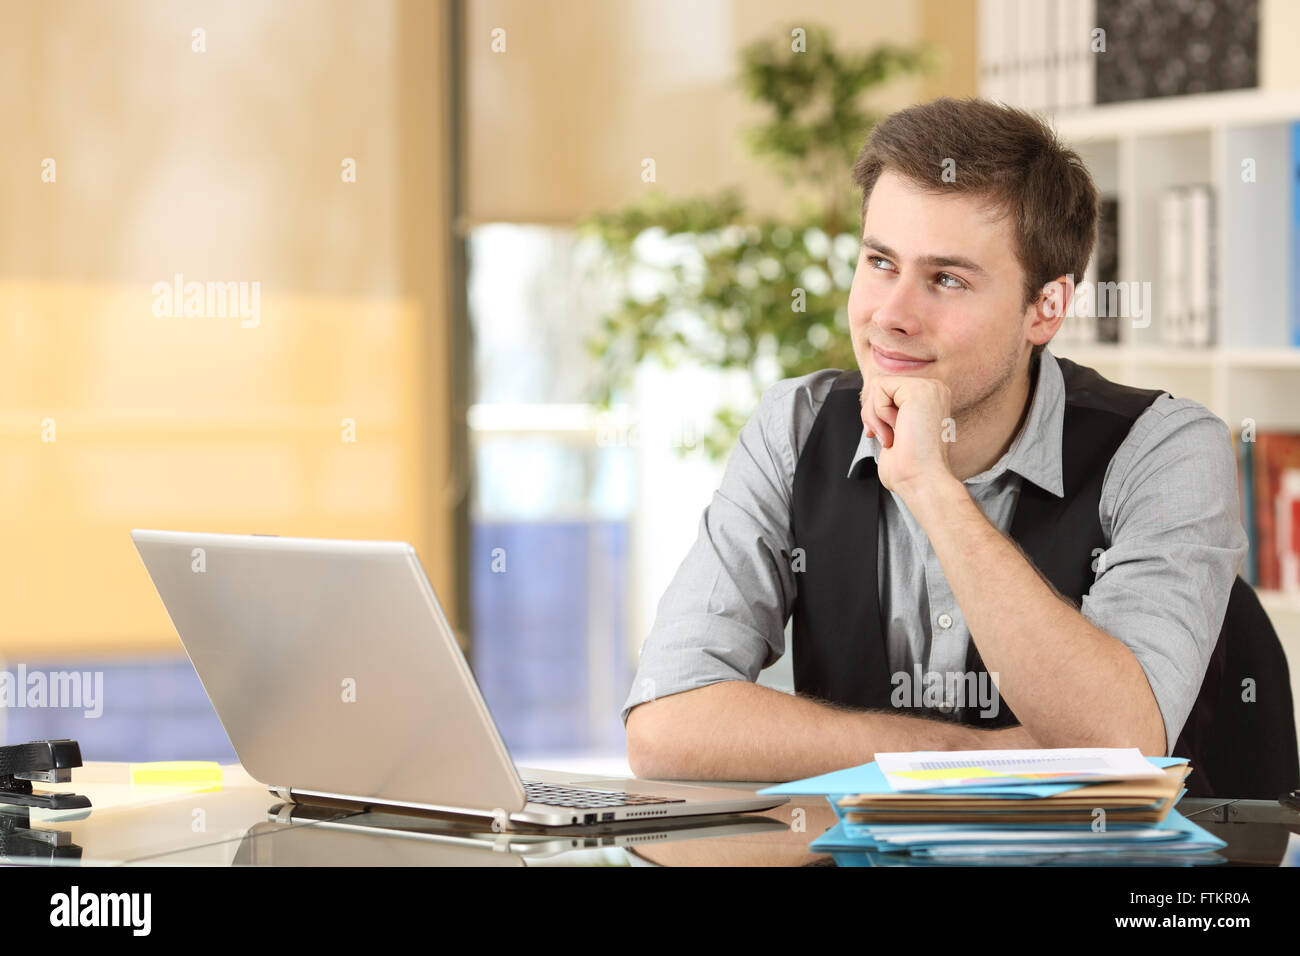 Businessman thinking and planning looking sideways sitting in a desktop with an office background Stock Photo